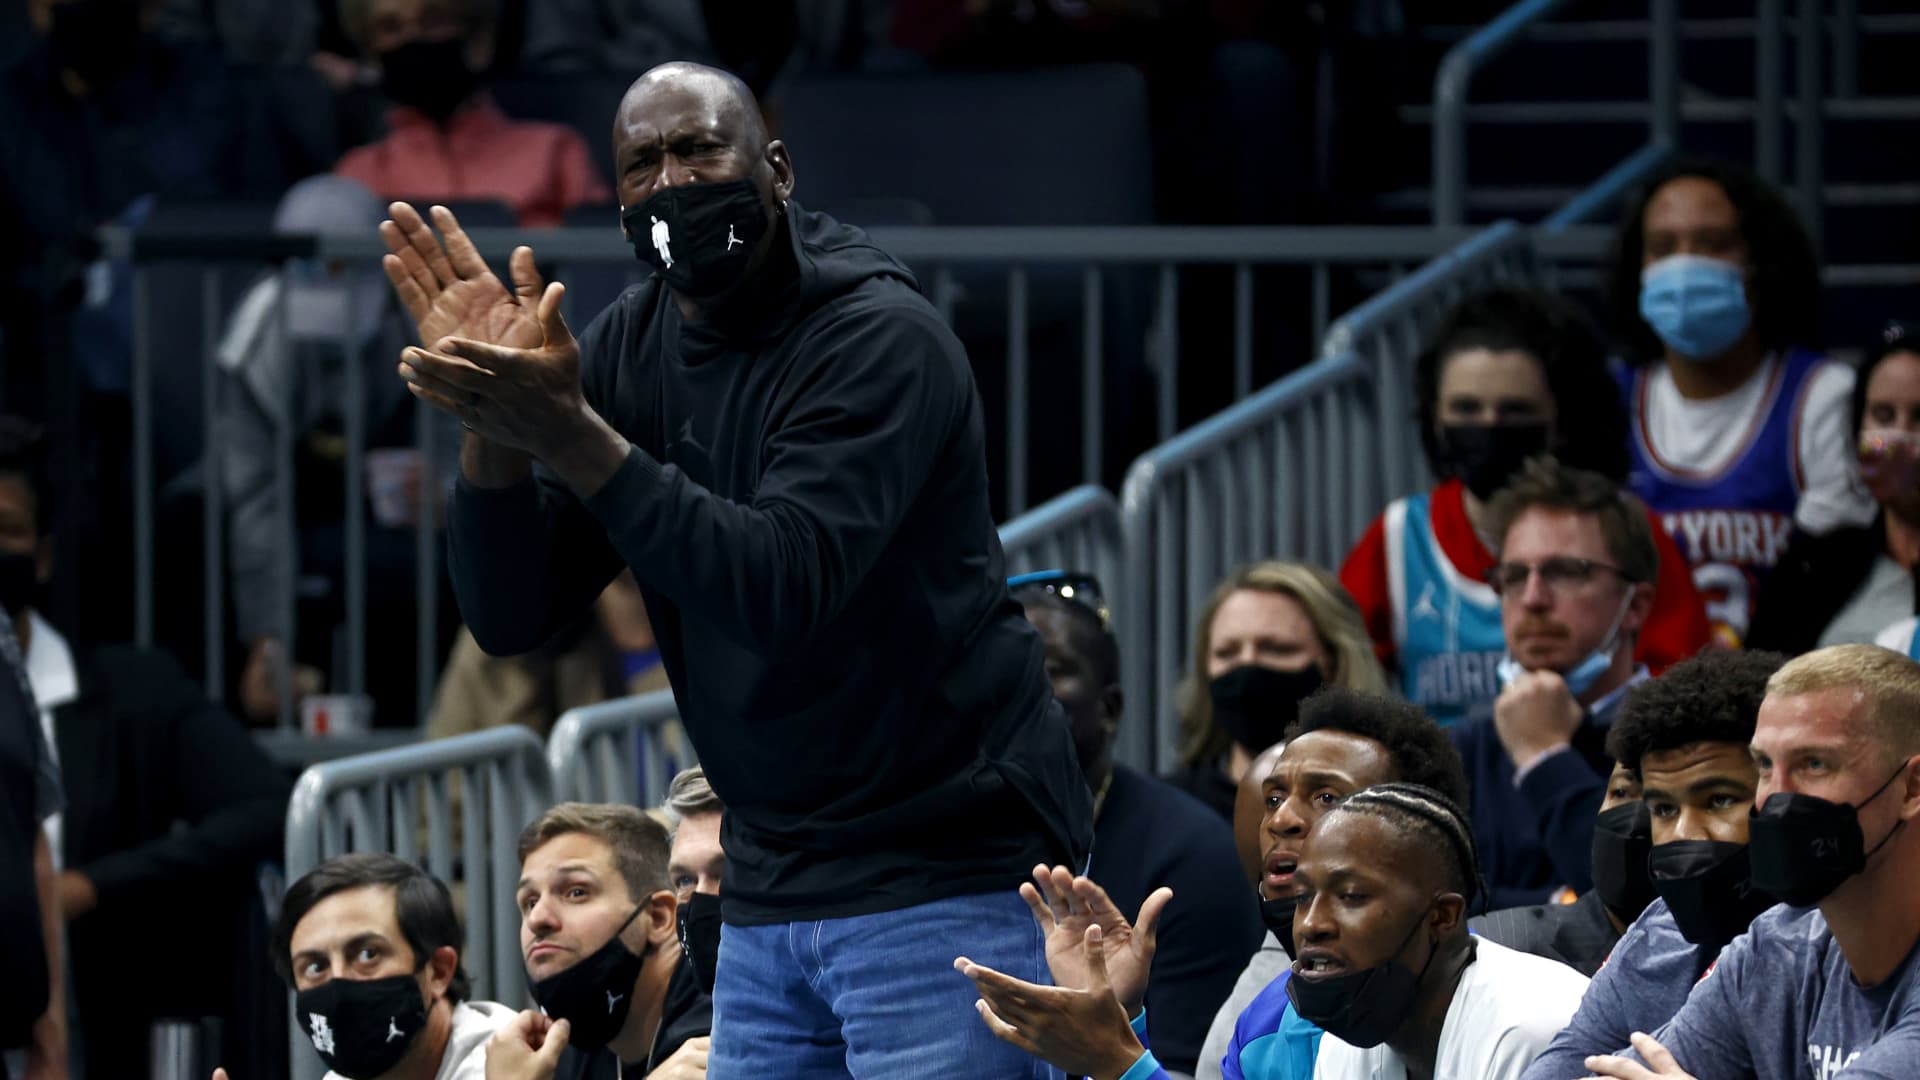 Charlotte Hornets owner and Hall of Famer Michael Jordan reacts during the first half of their game against the New York Knicks at Spectrum Center on November 12, 2021 in Charlotte, North Carolina.